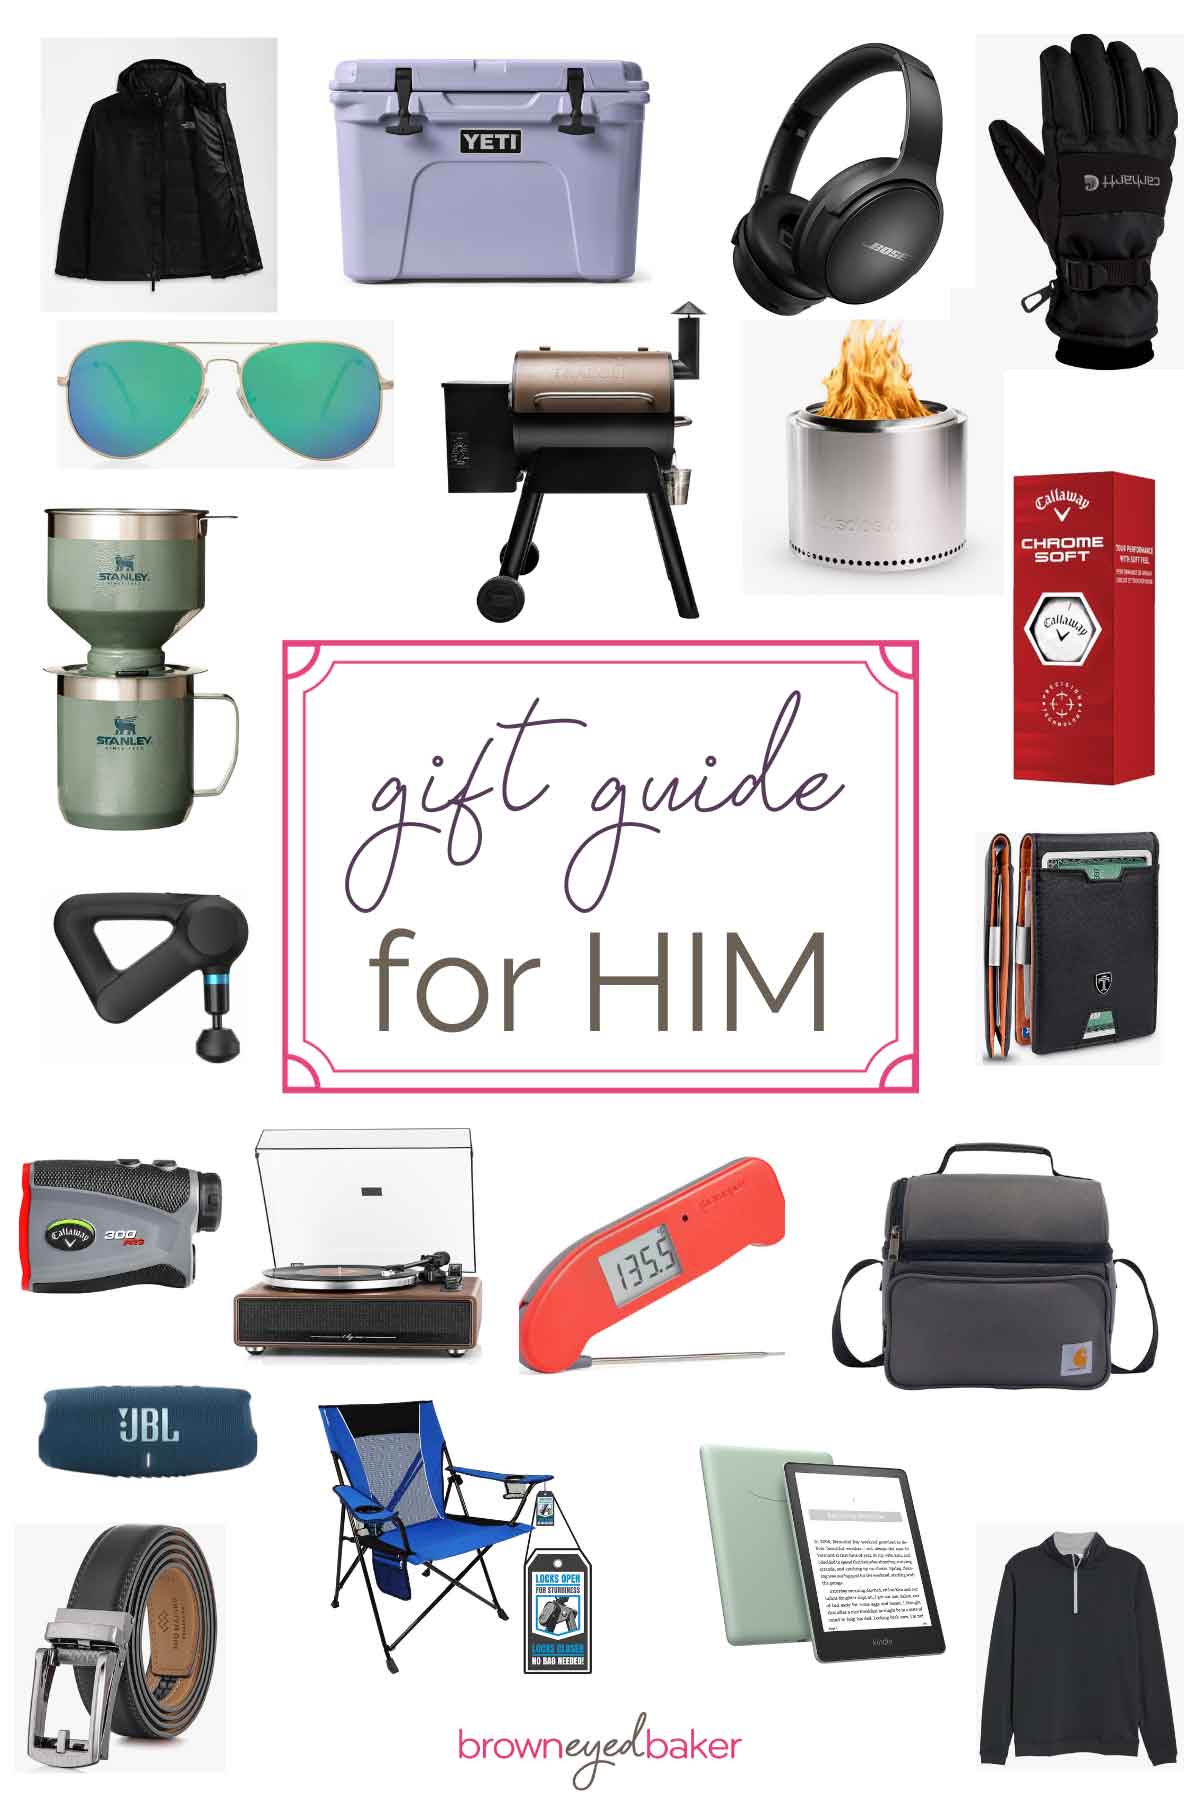 Collage of product images with a pink frame in the center with text inside "gift guide for him".